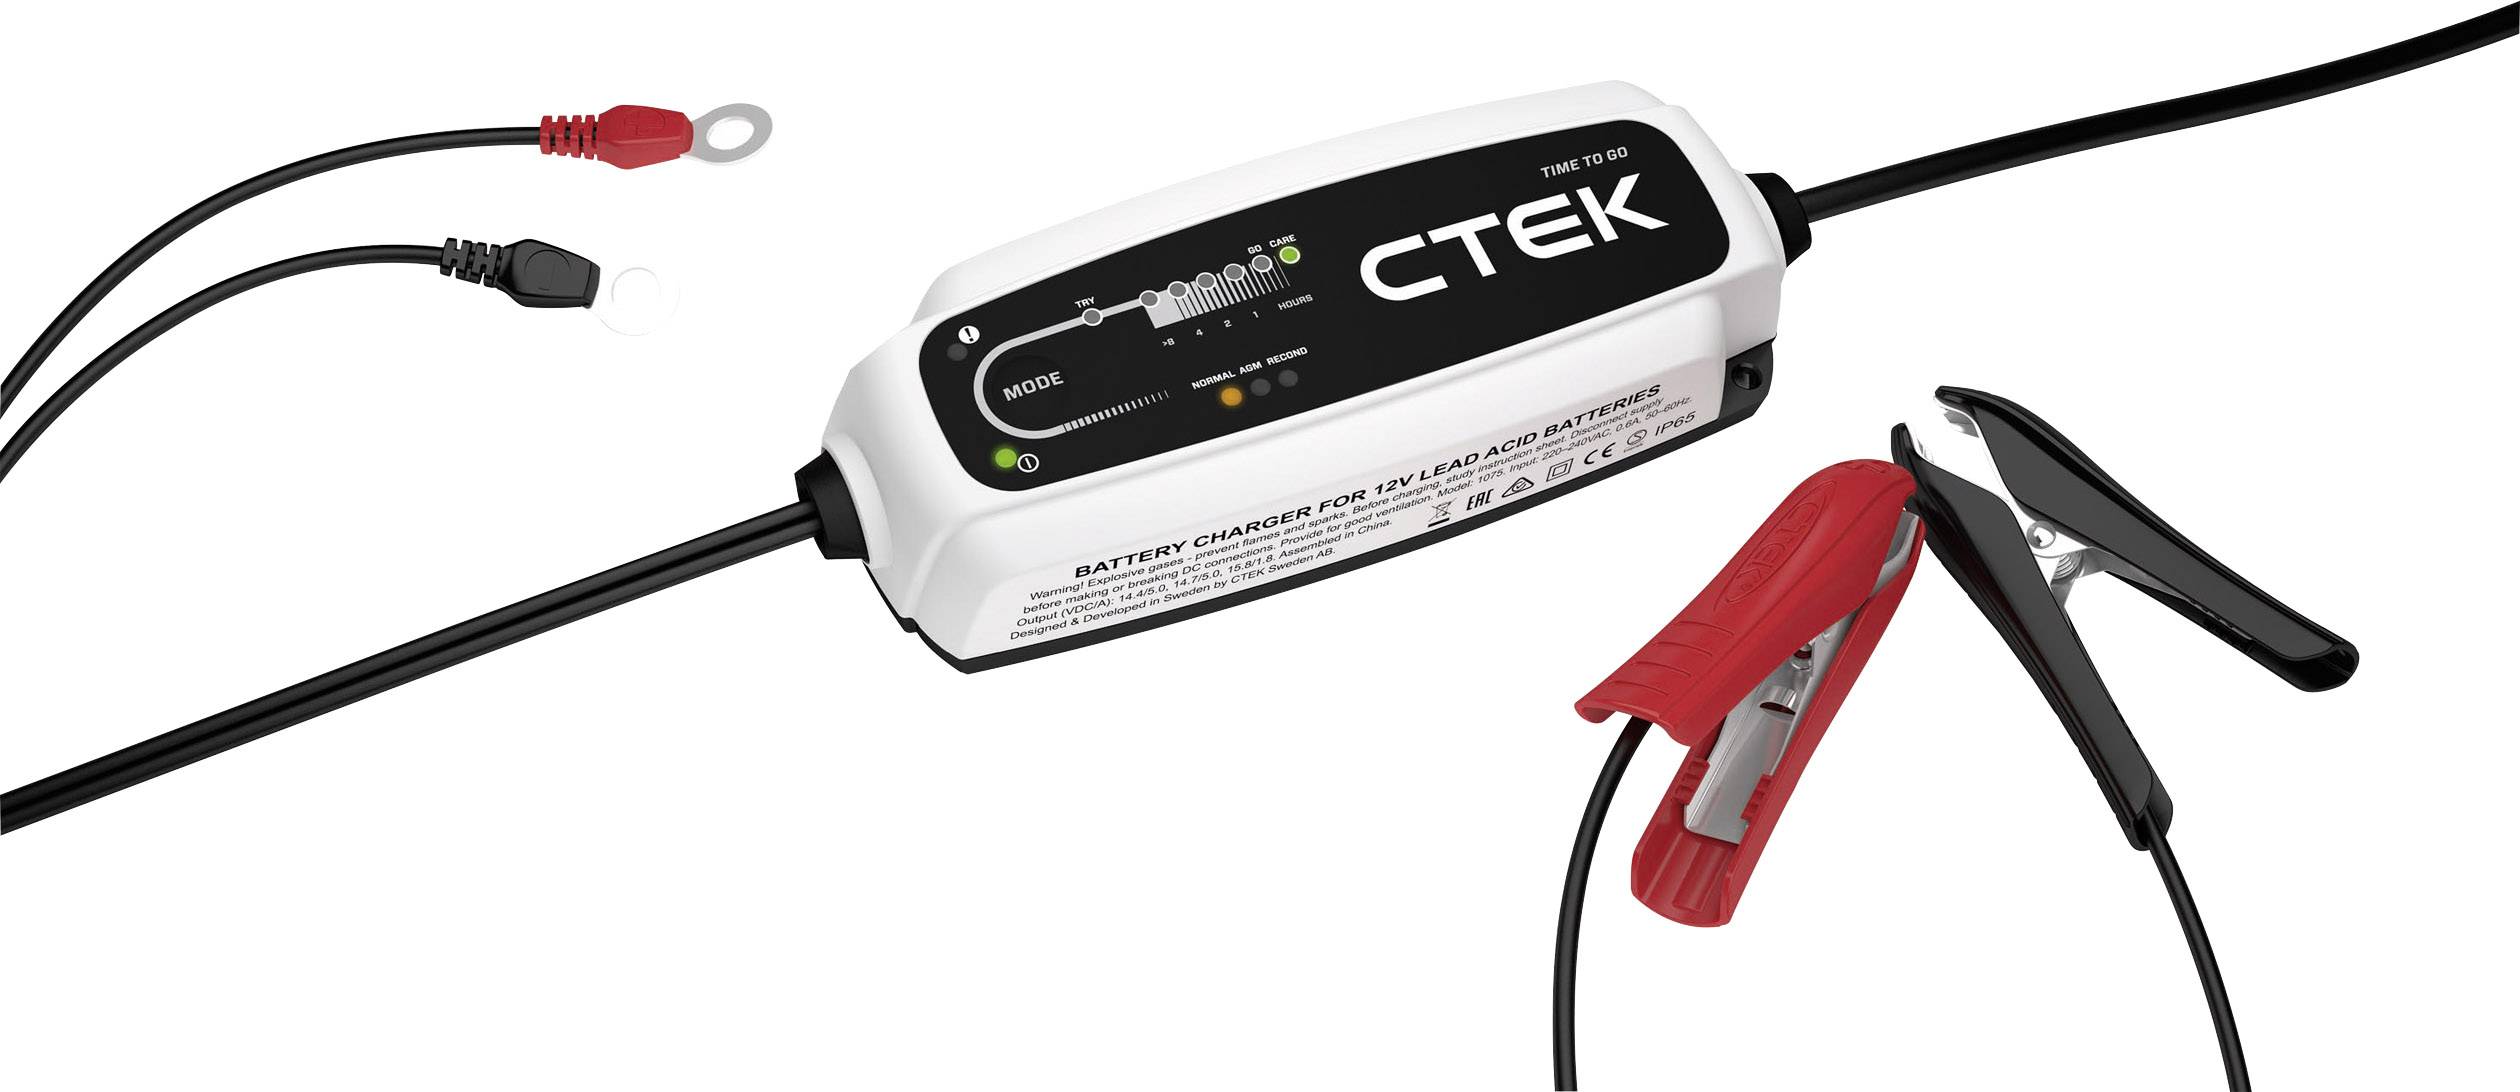 CTEK CTEK CT5 Time to Go Fully Automatic Battery Charger with a Countdown Display EU 